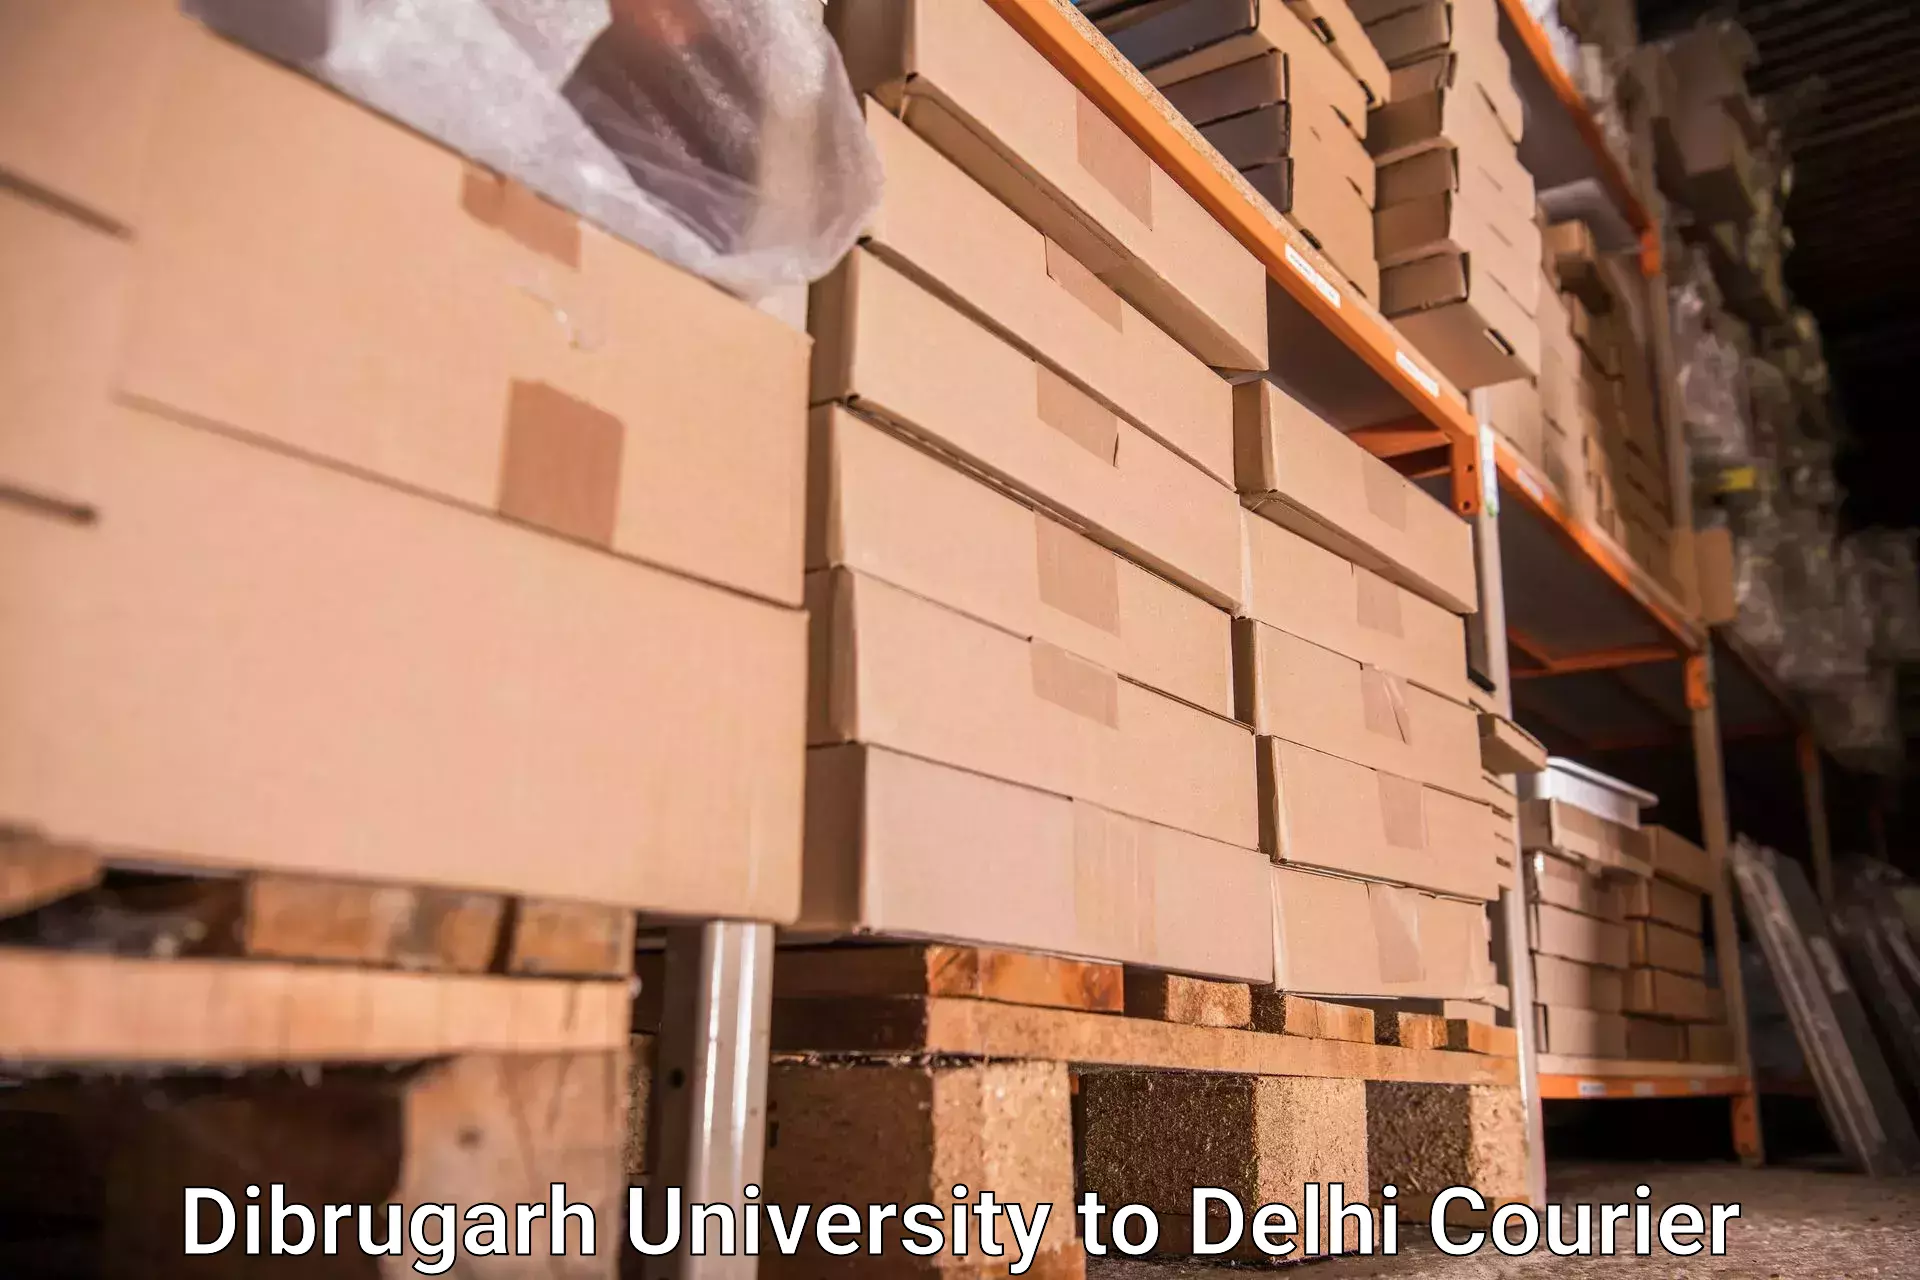 Personal effects shipping Dibrugarh University to Delhi Technological University DTU